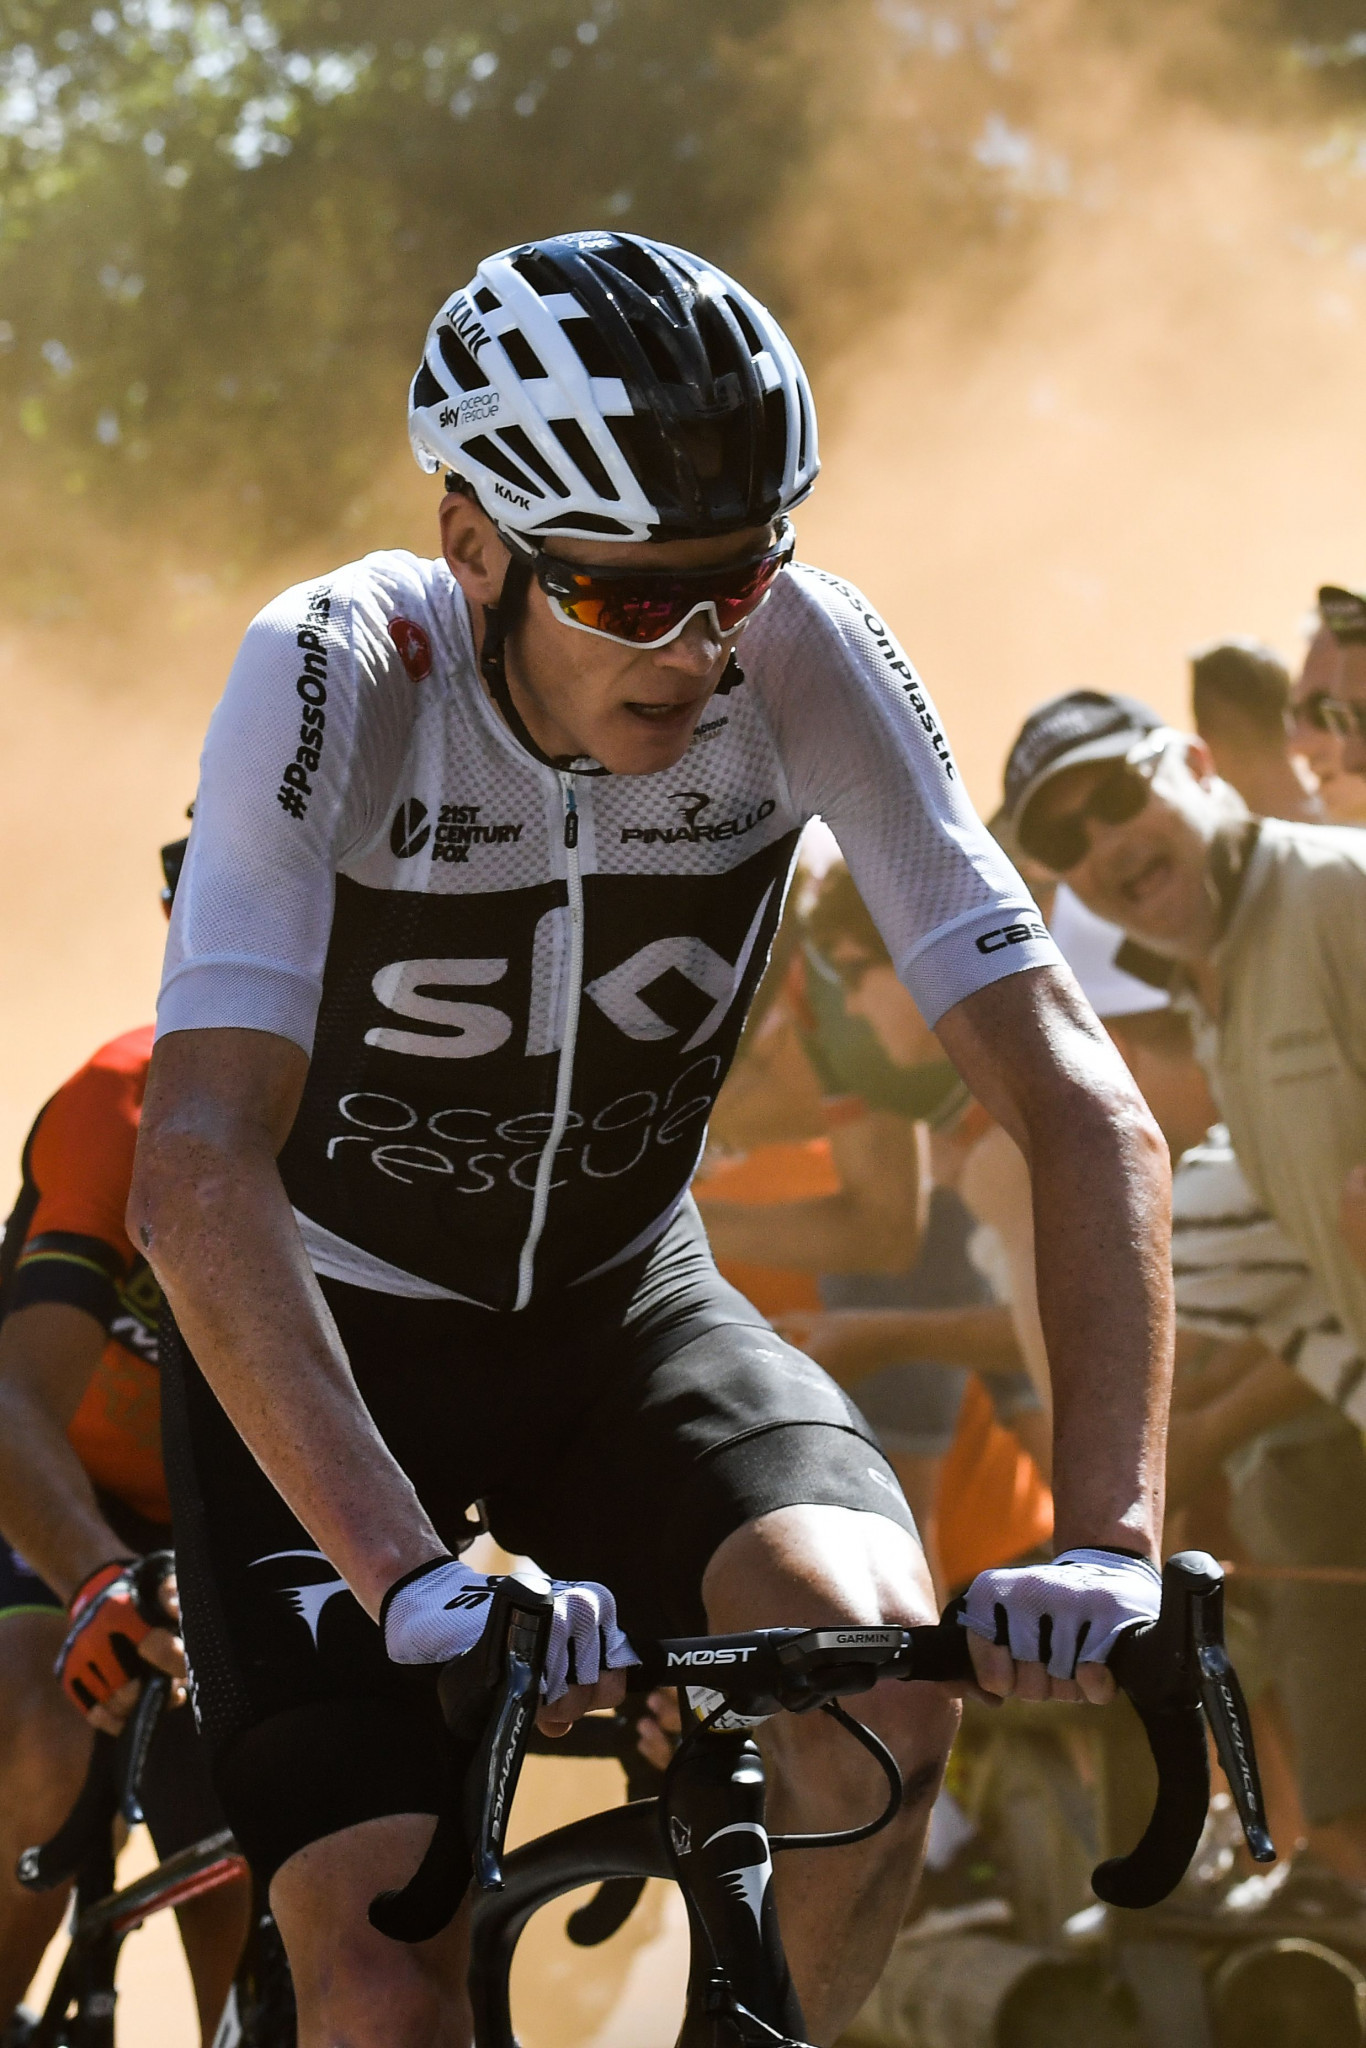 Chris Froome sits in second place behind his Team Sky colleague ©Getty Images